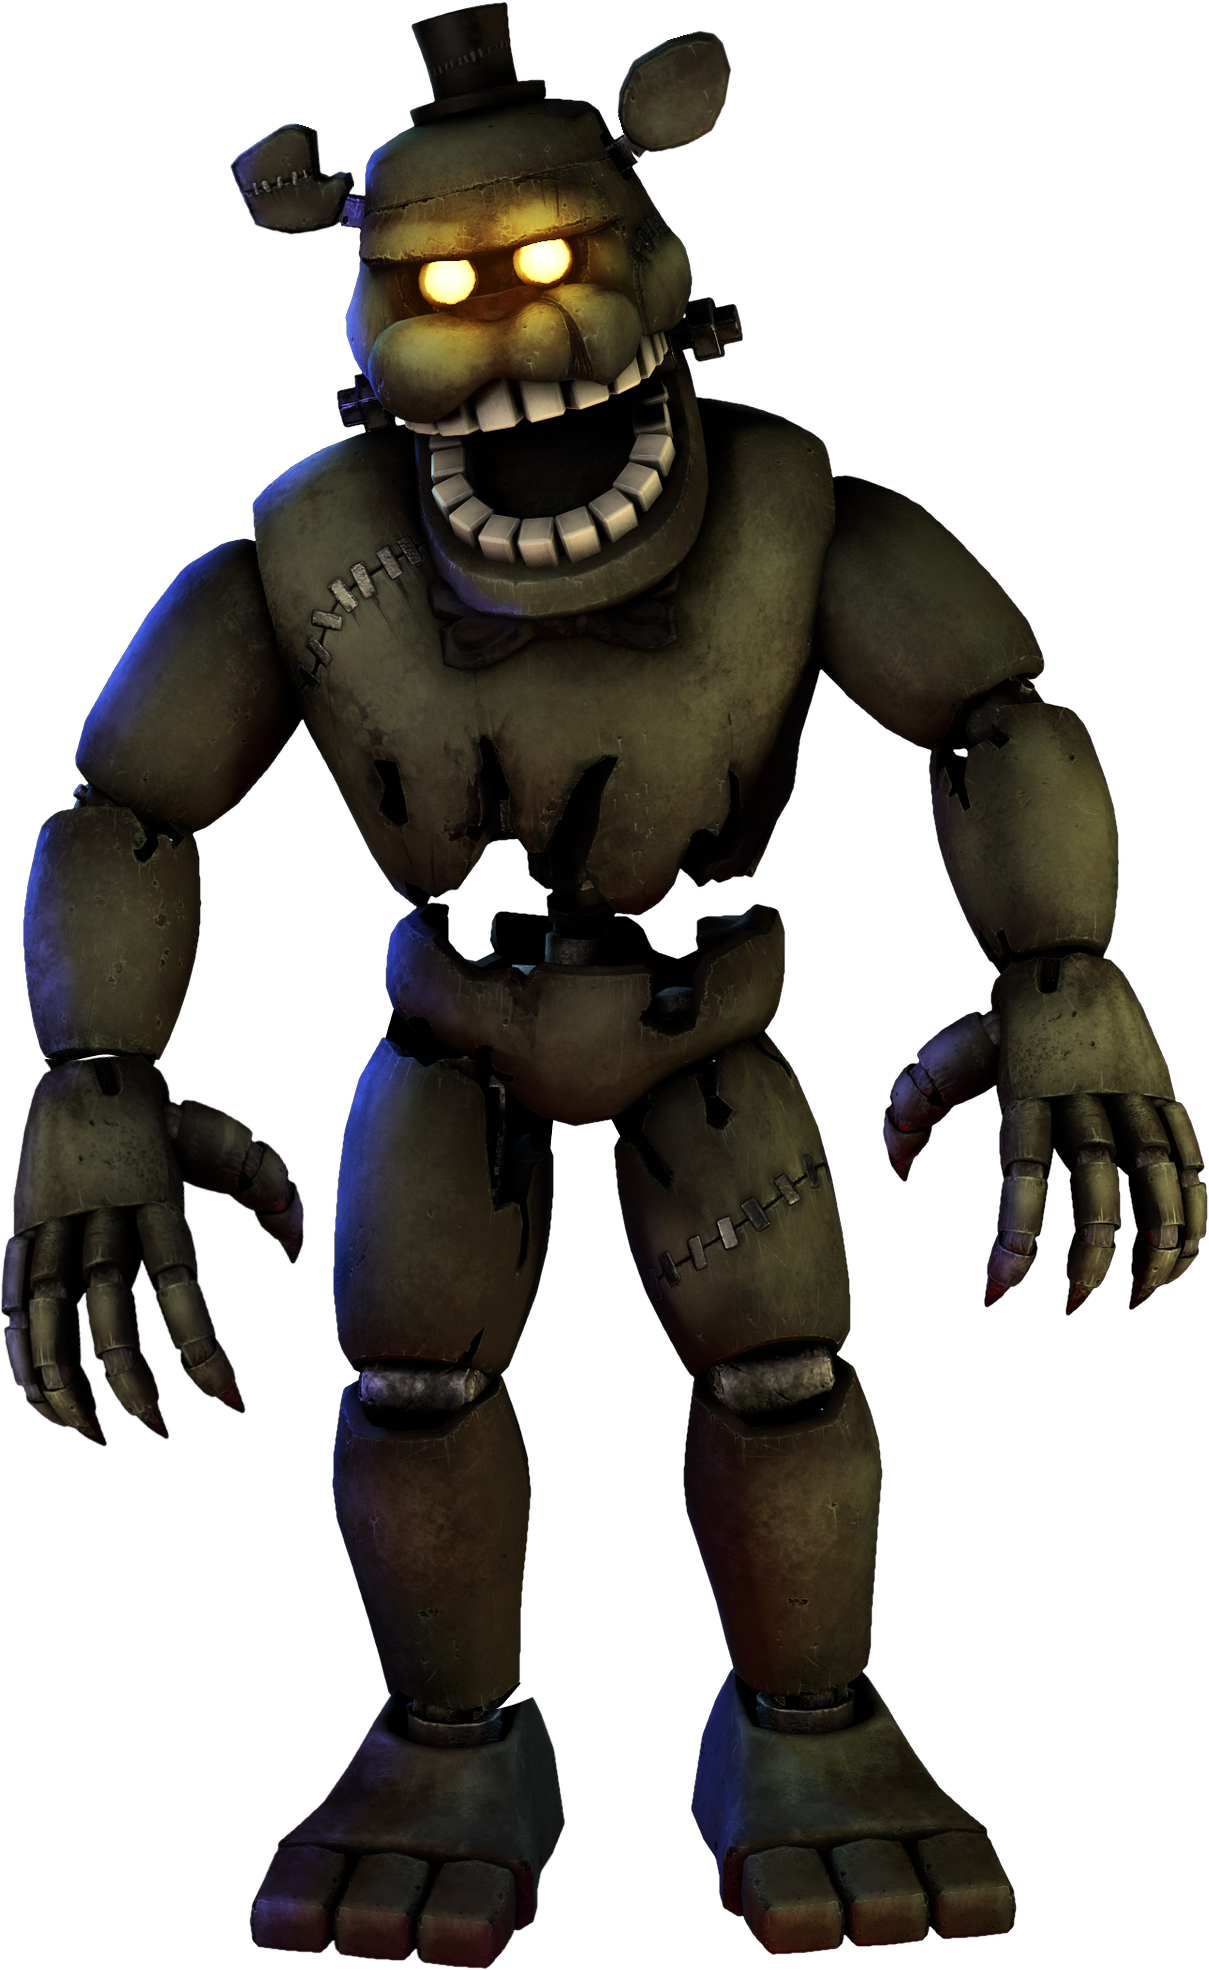 Rexx — Could I get Scraptrap and Nightmare Fredbear for